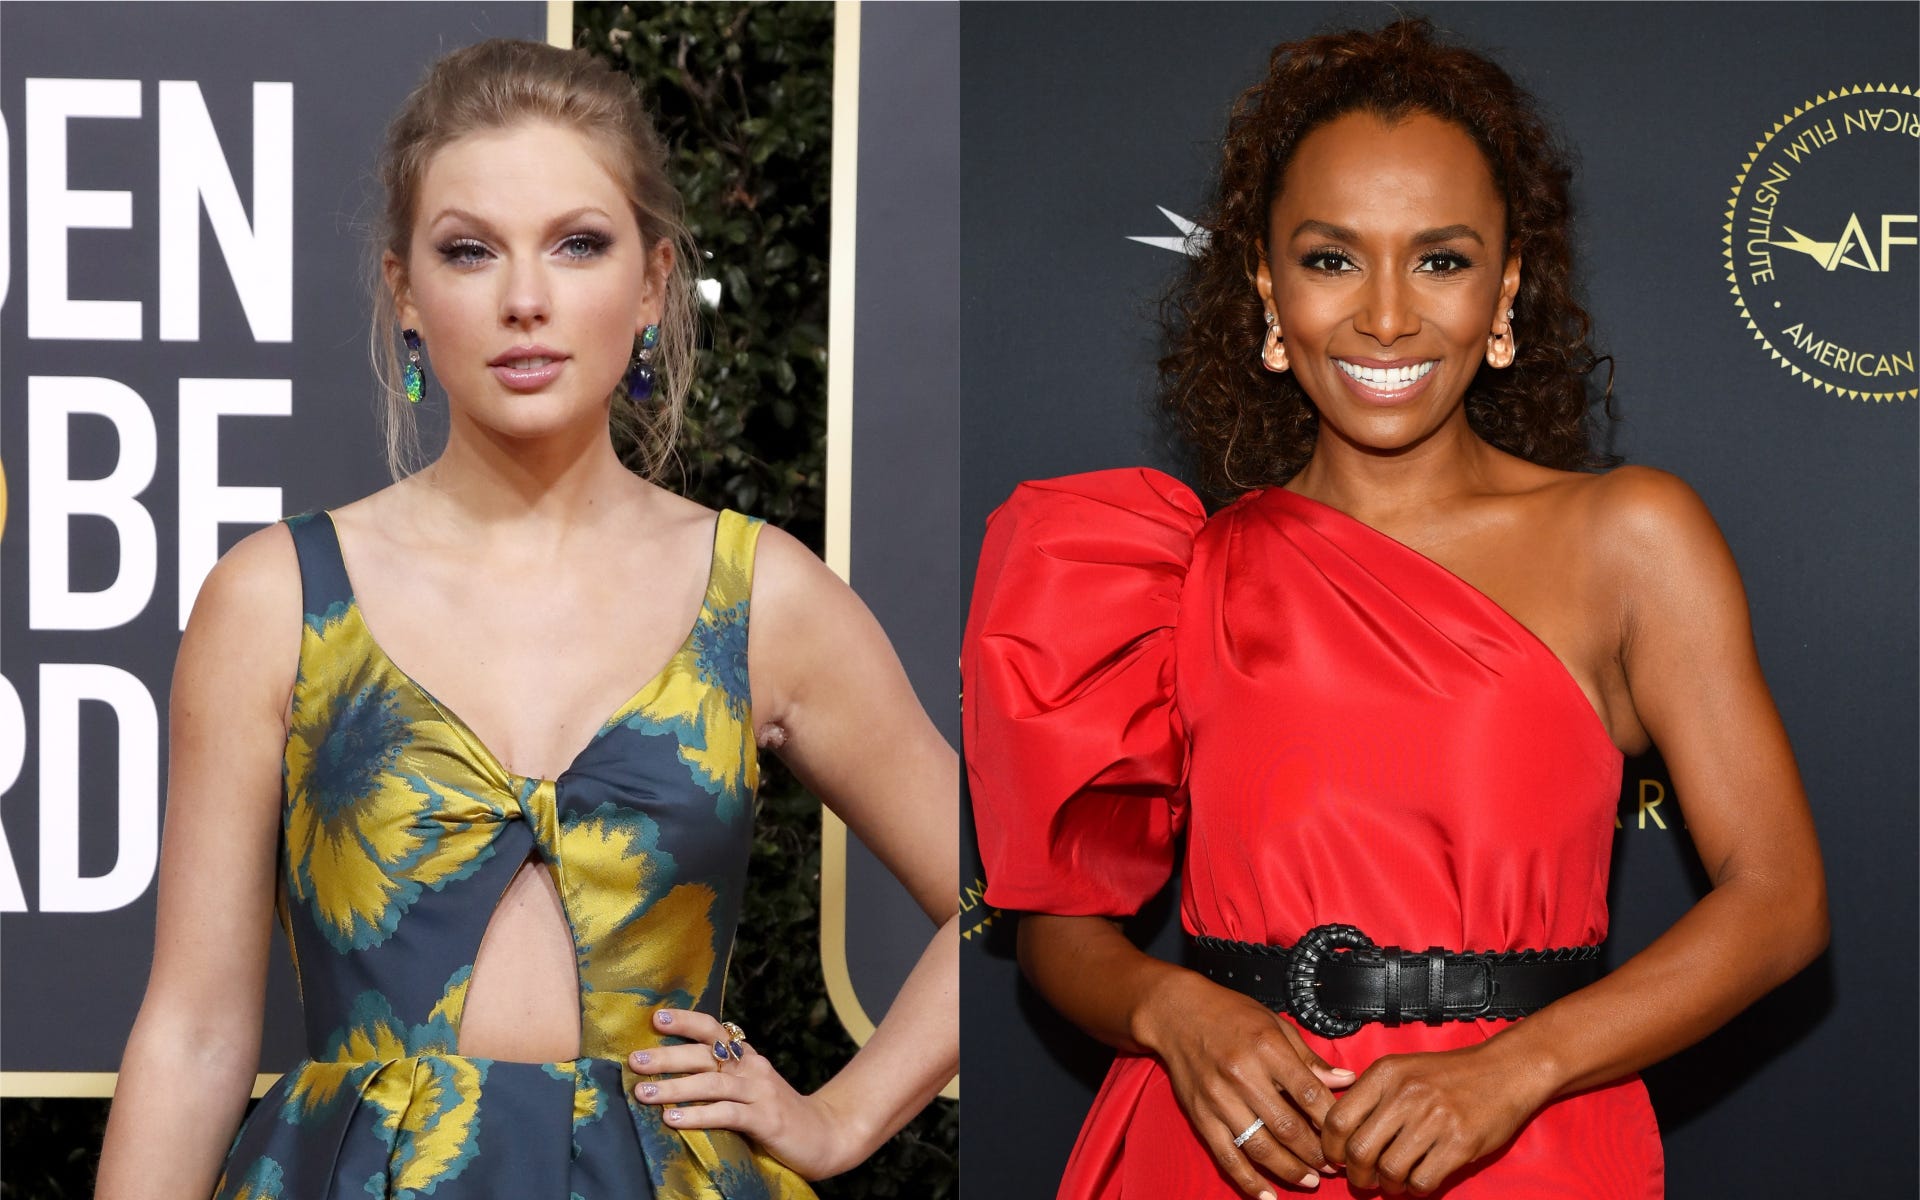 Taylor Swift Pose Writer Janet Mock To Be Honored At